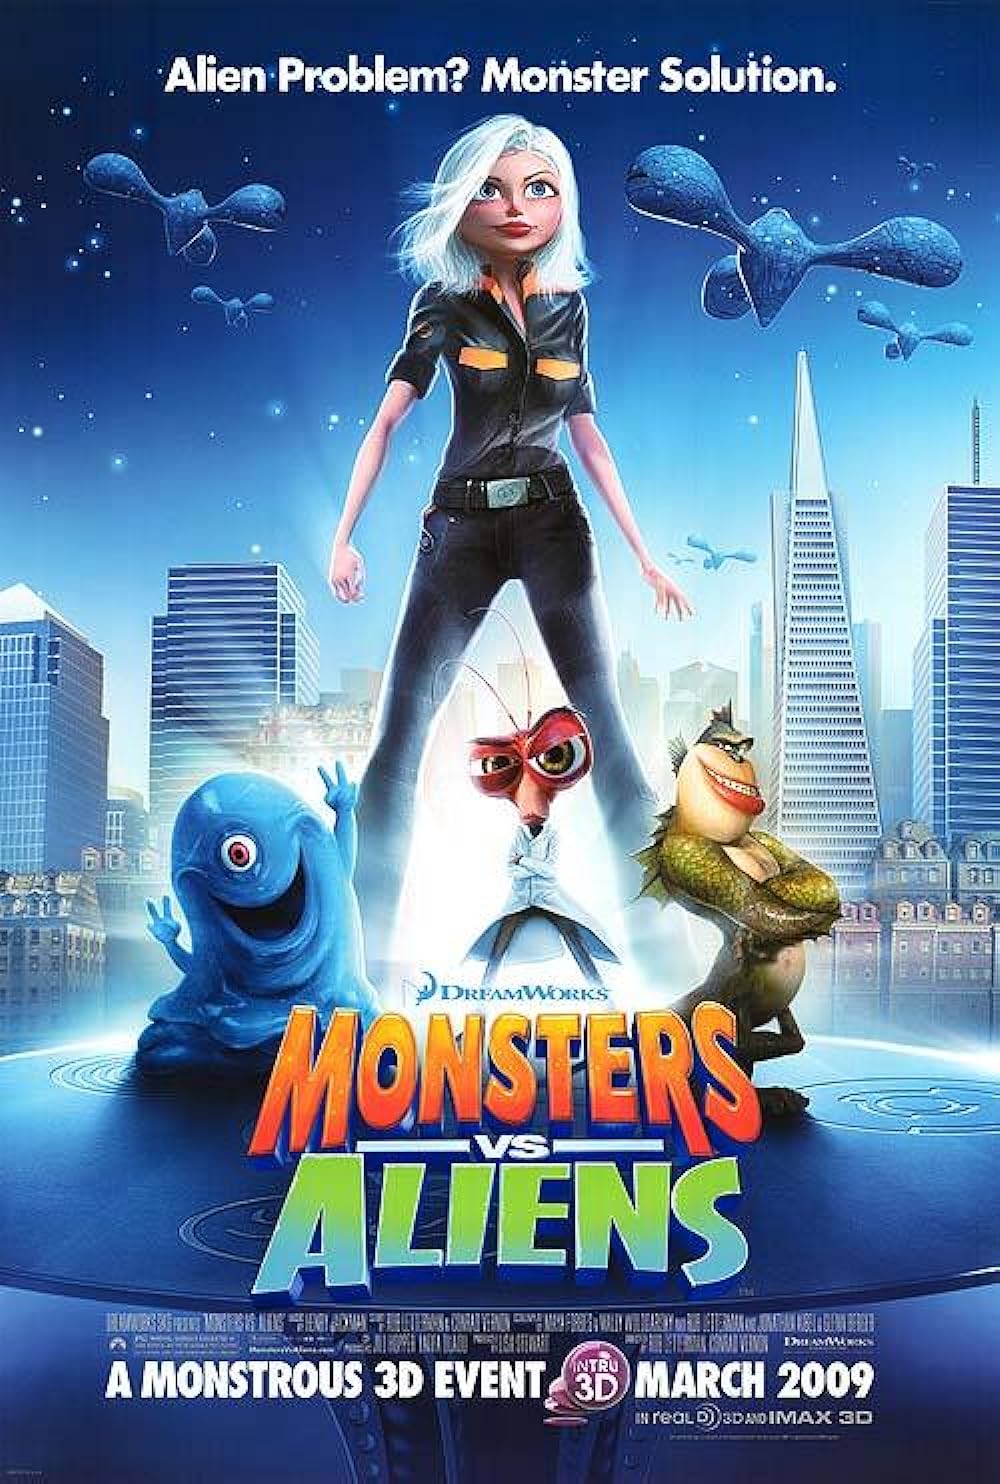 annelize barnard recommends sexy monsters vs aliens pic